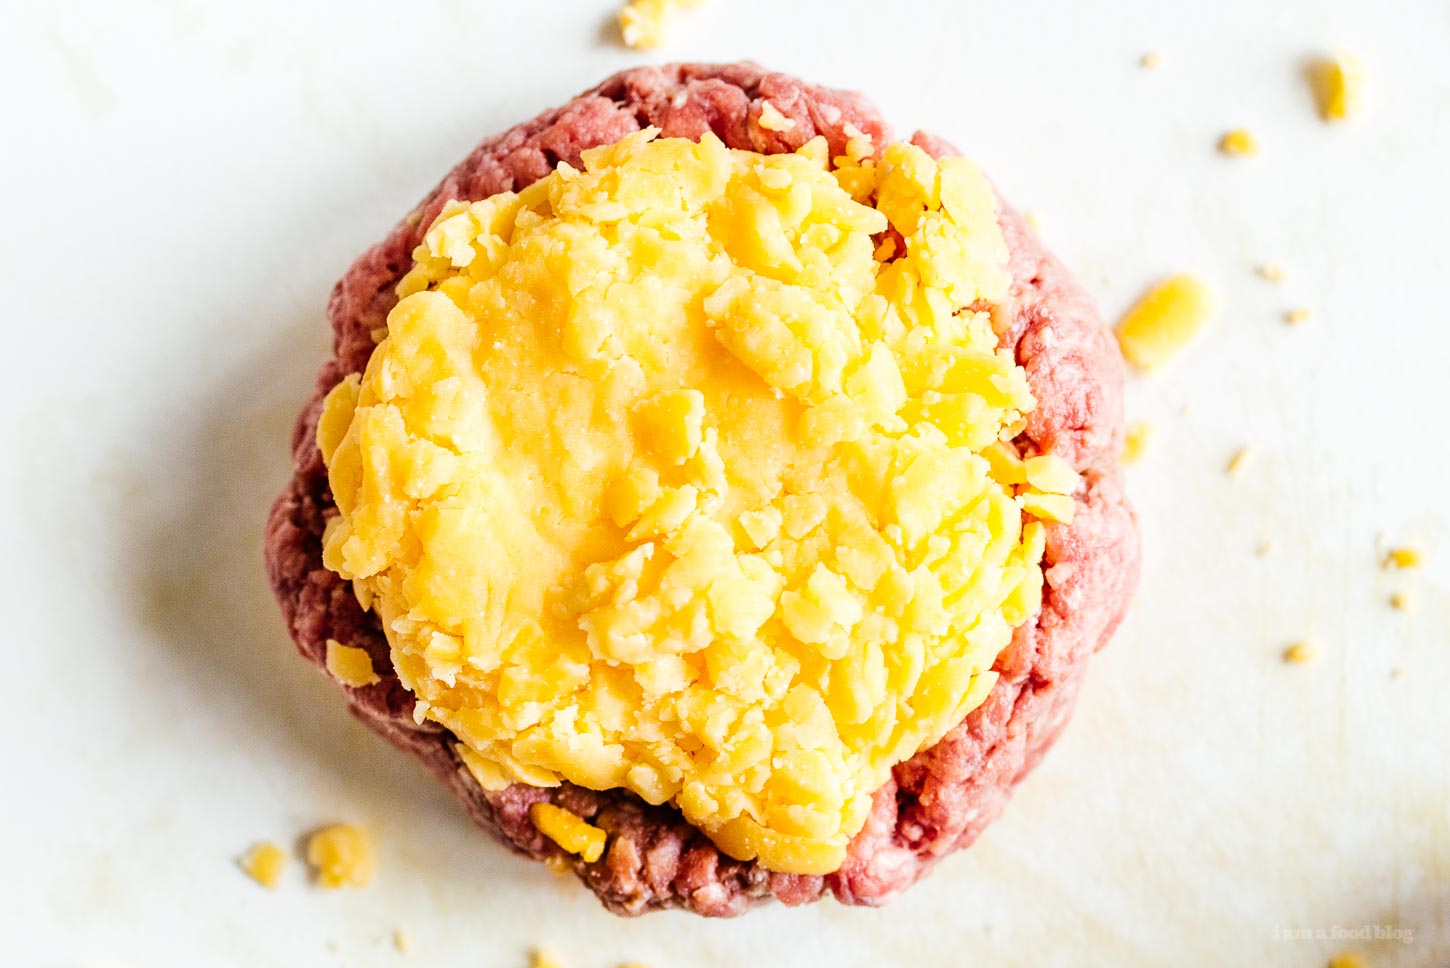 cheese inside a juicy lucy | www.iamafoodblog.com